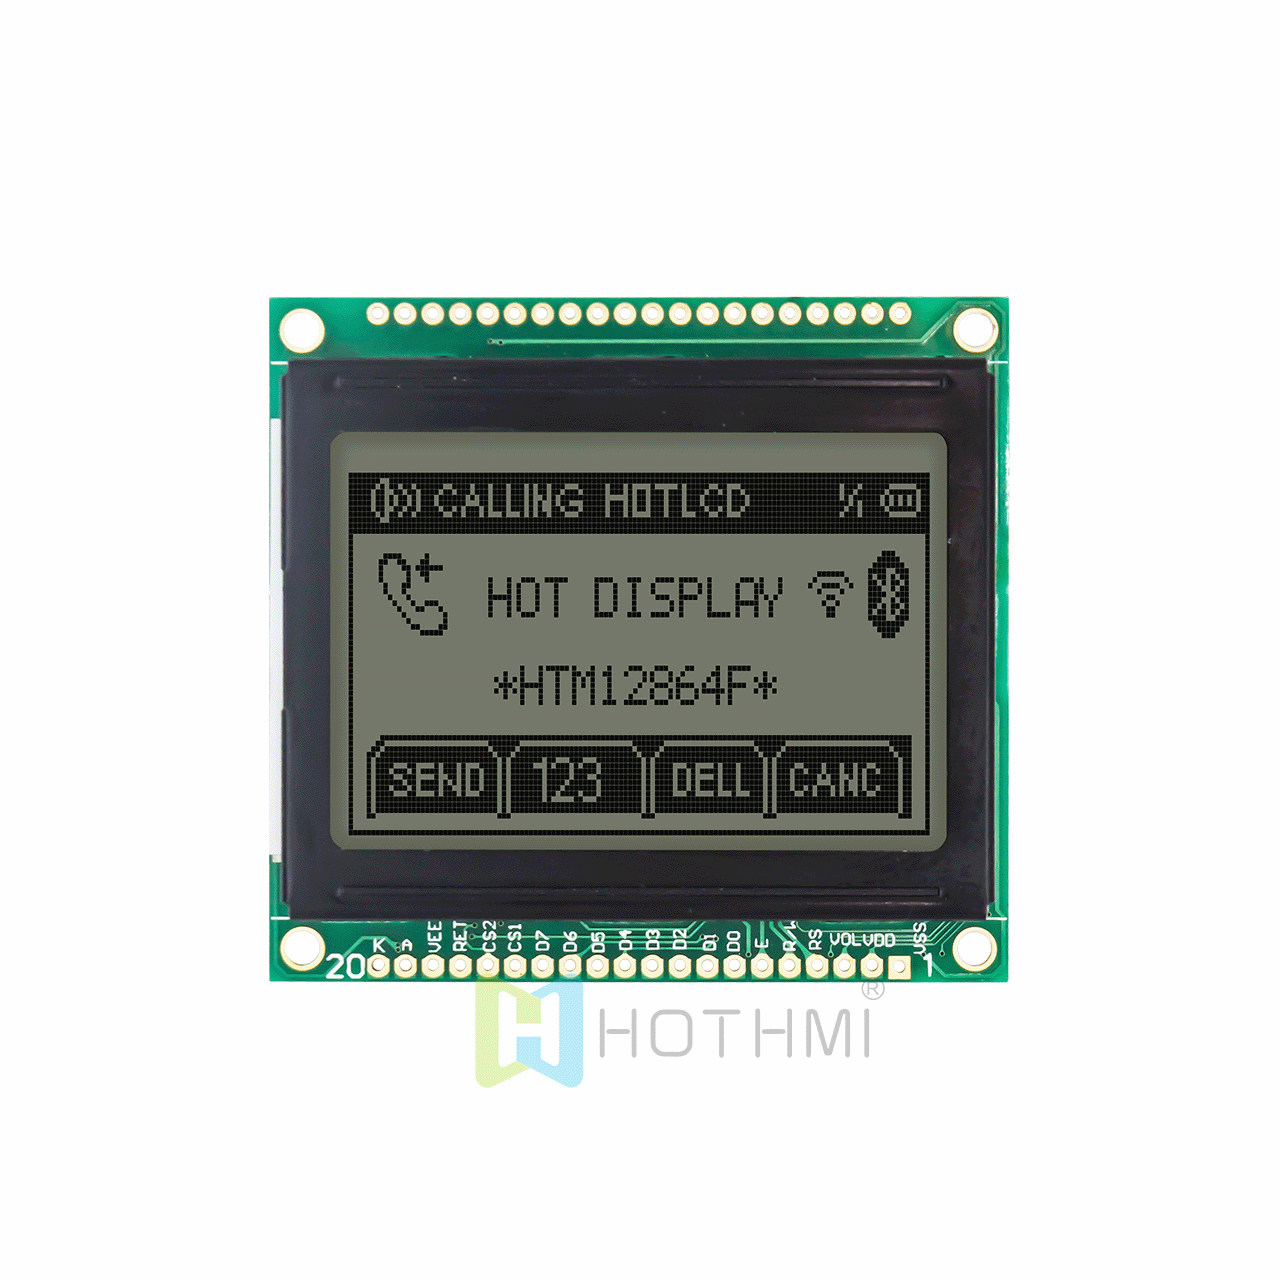 2-inch low-cost graphic LCD module | 128 x 64 graphic COB module | 12864 graphic LCD display | KS108 AIP31107 controller | FSTN front display | gray text on white background